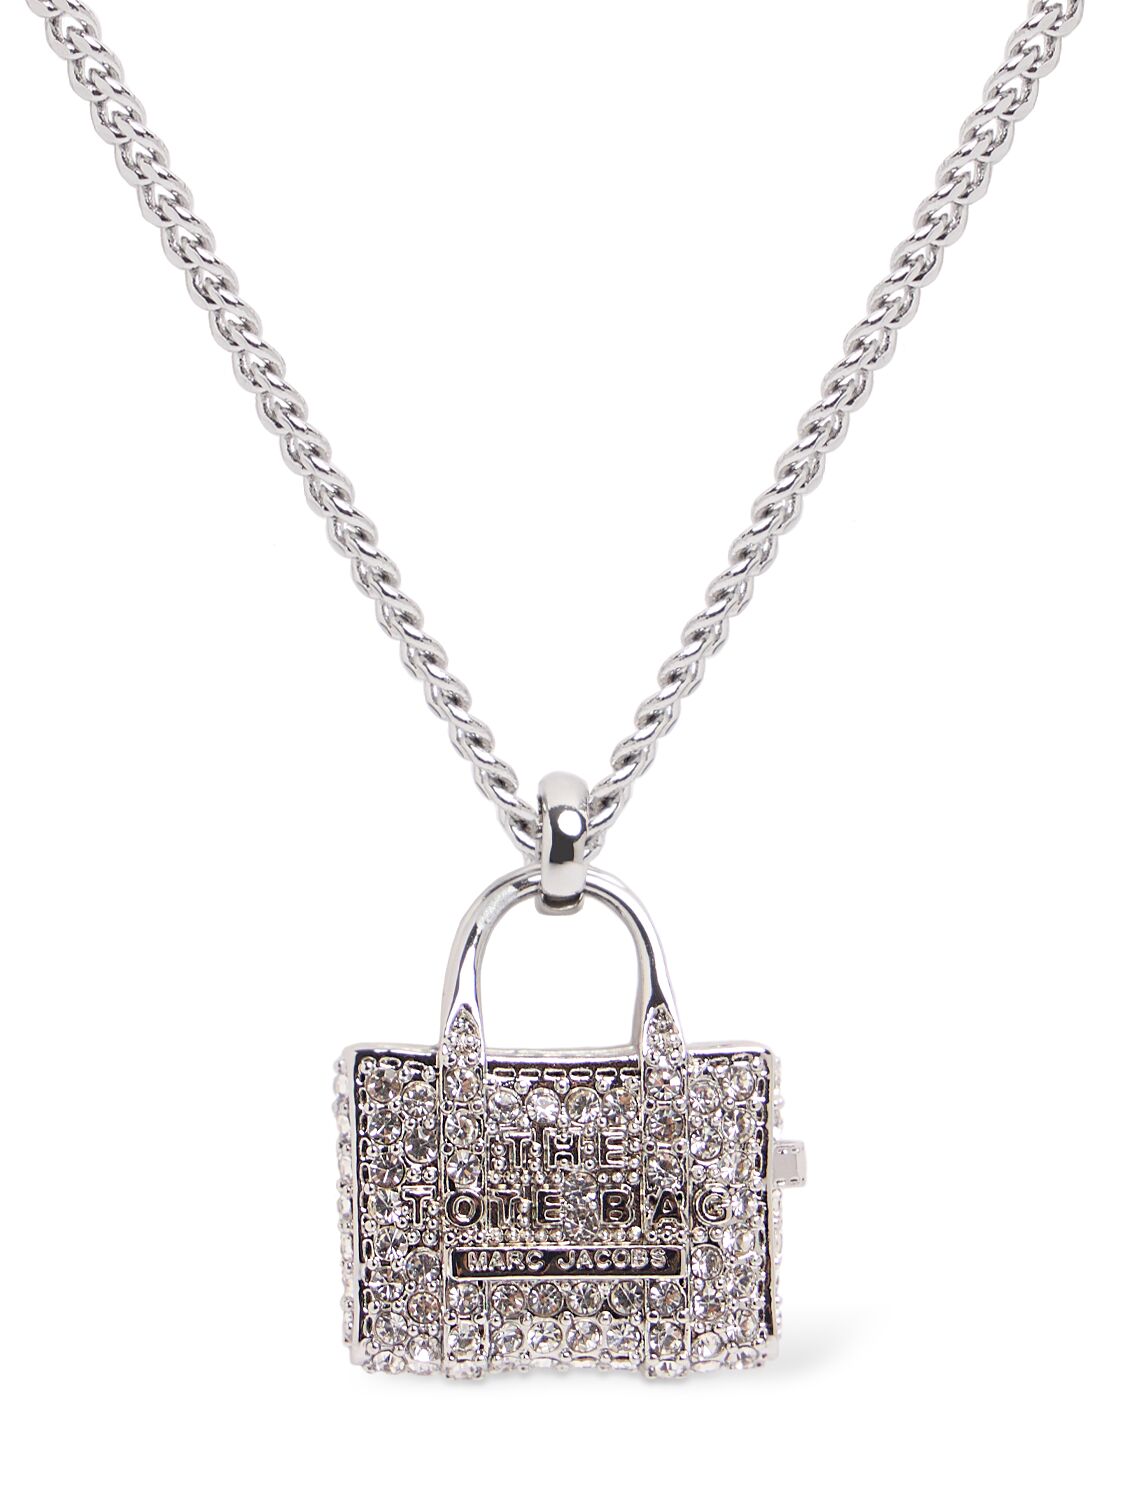 The Pavé Tote Crystal Pendant Necklace